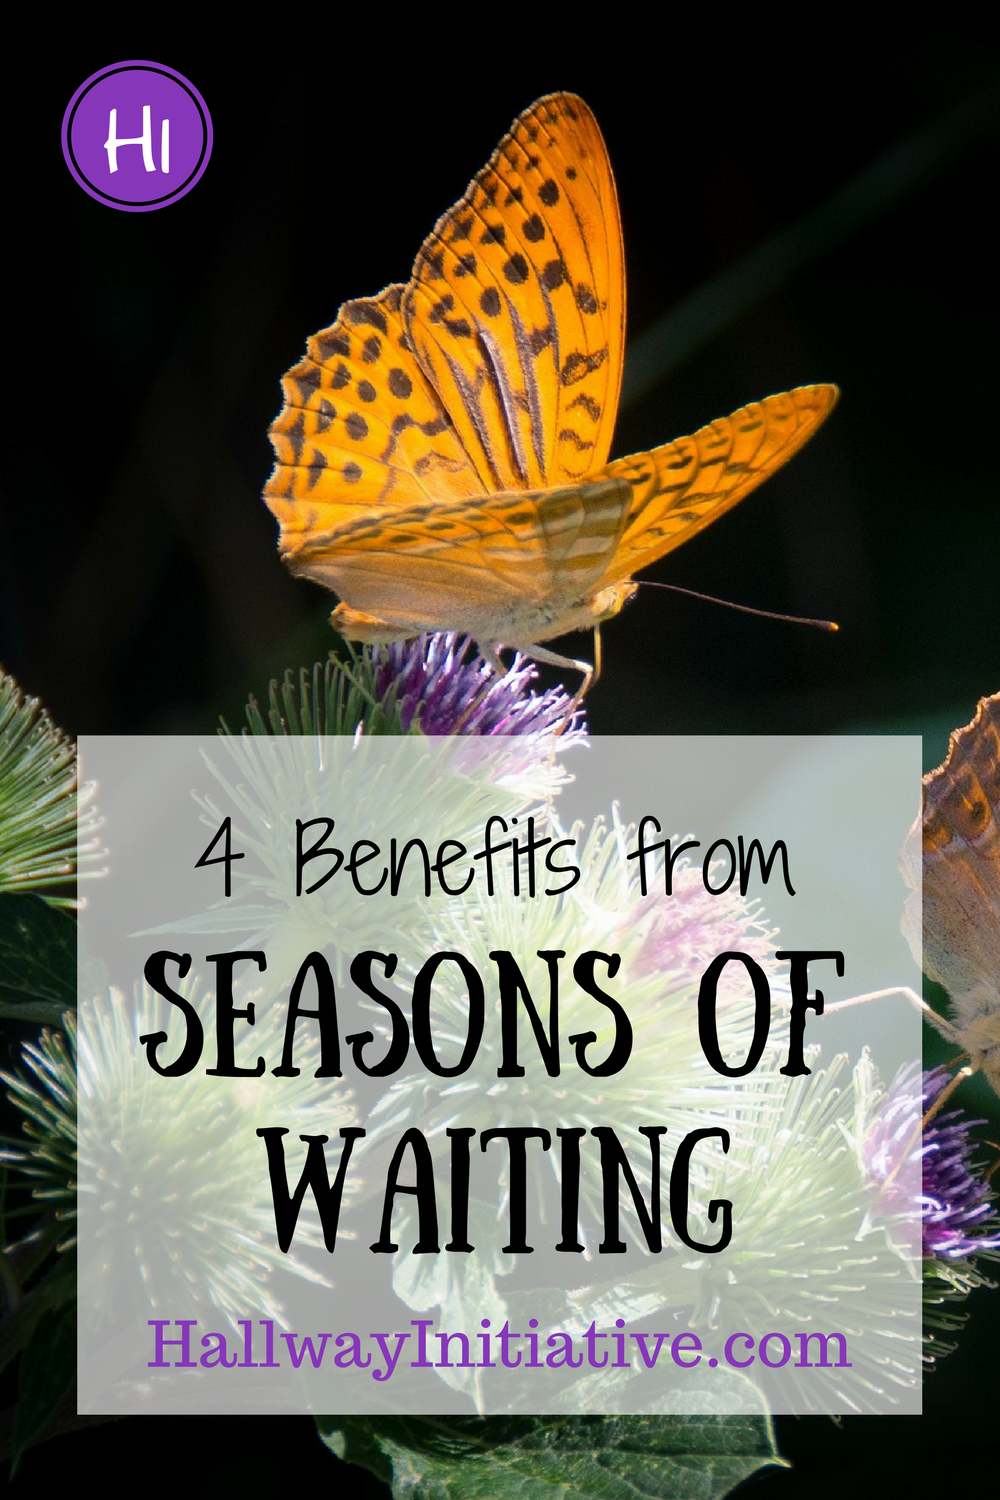 4 benefits from seasons of waiting